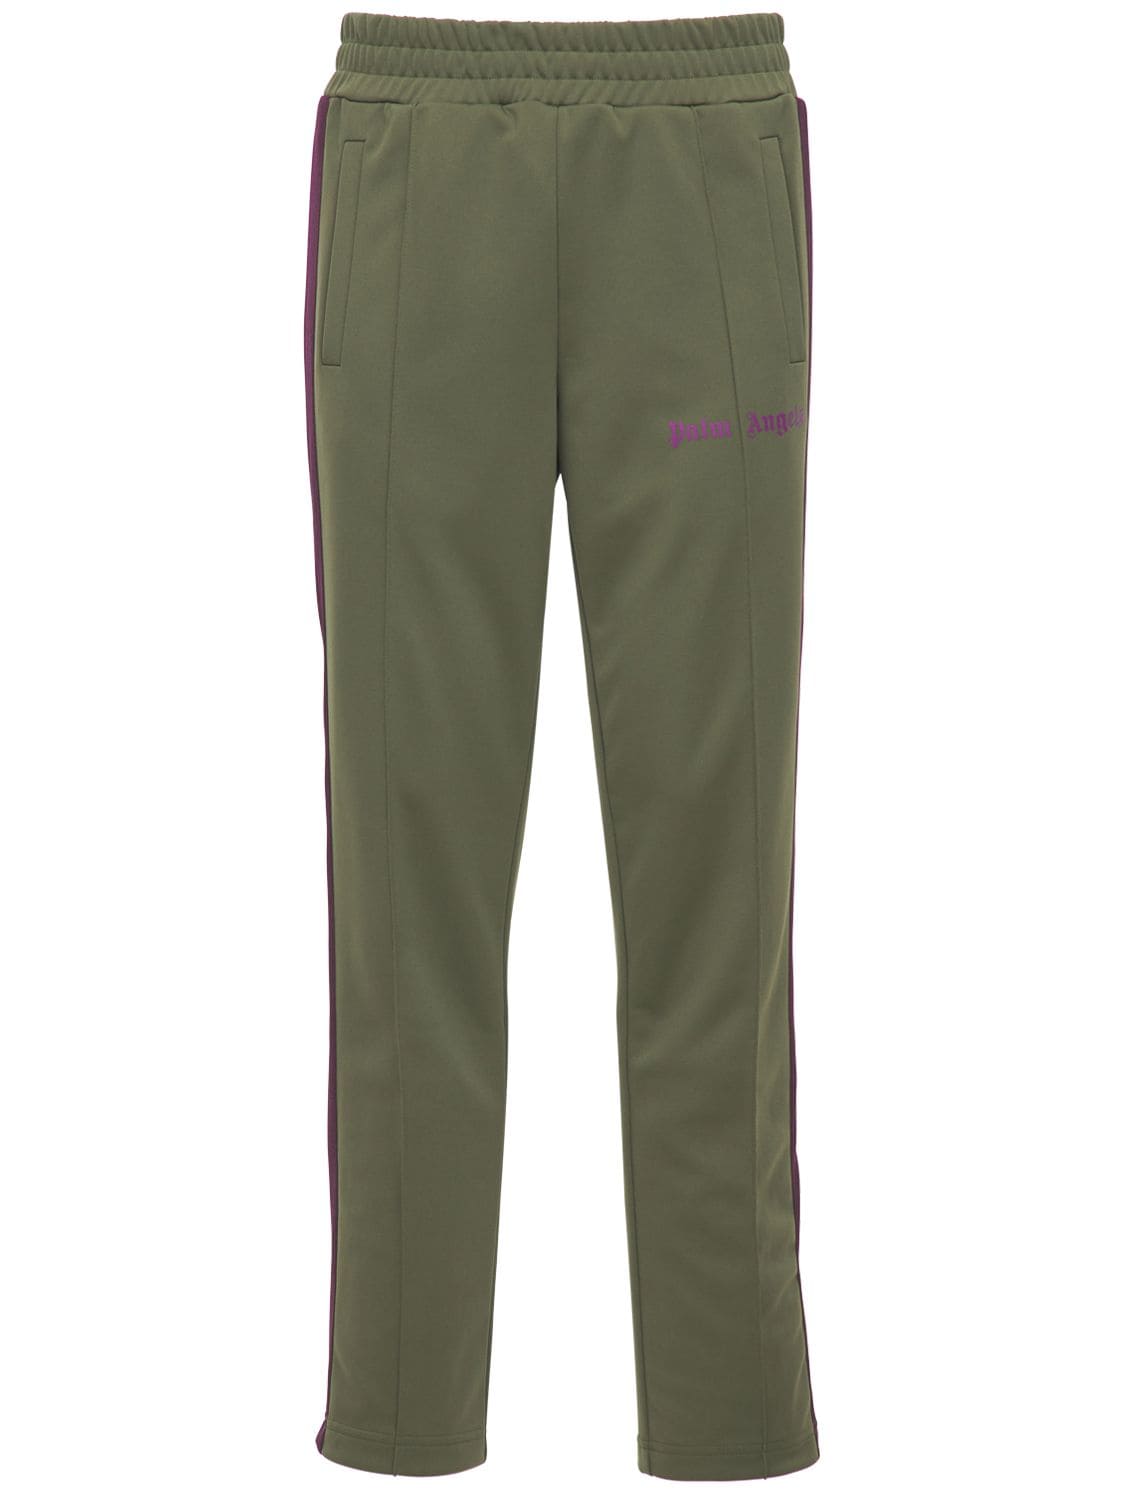 PALM ANGELS COLLEGE TECH TRACK trousers,73IXGF019-NTYZNW2